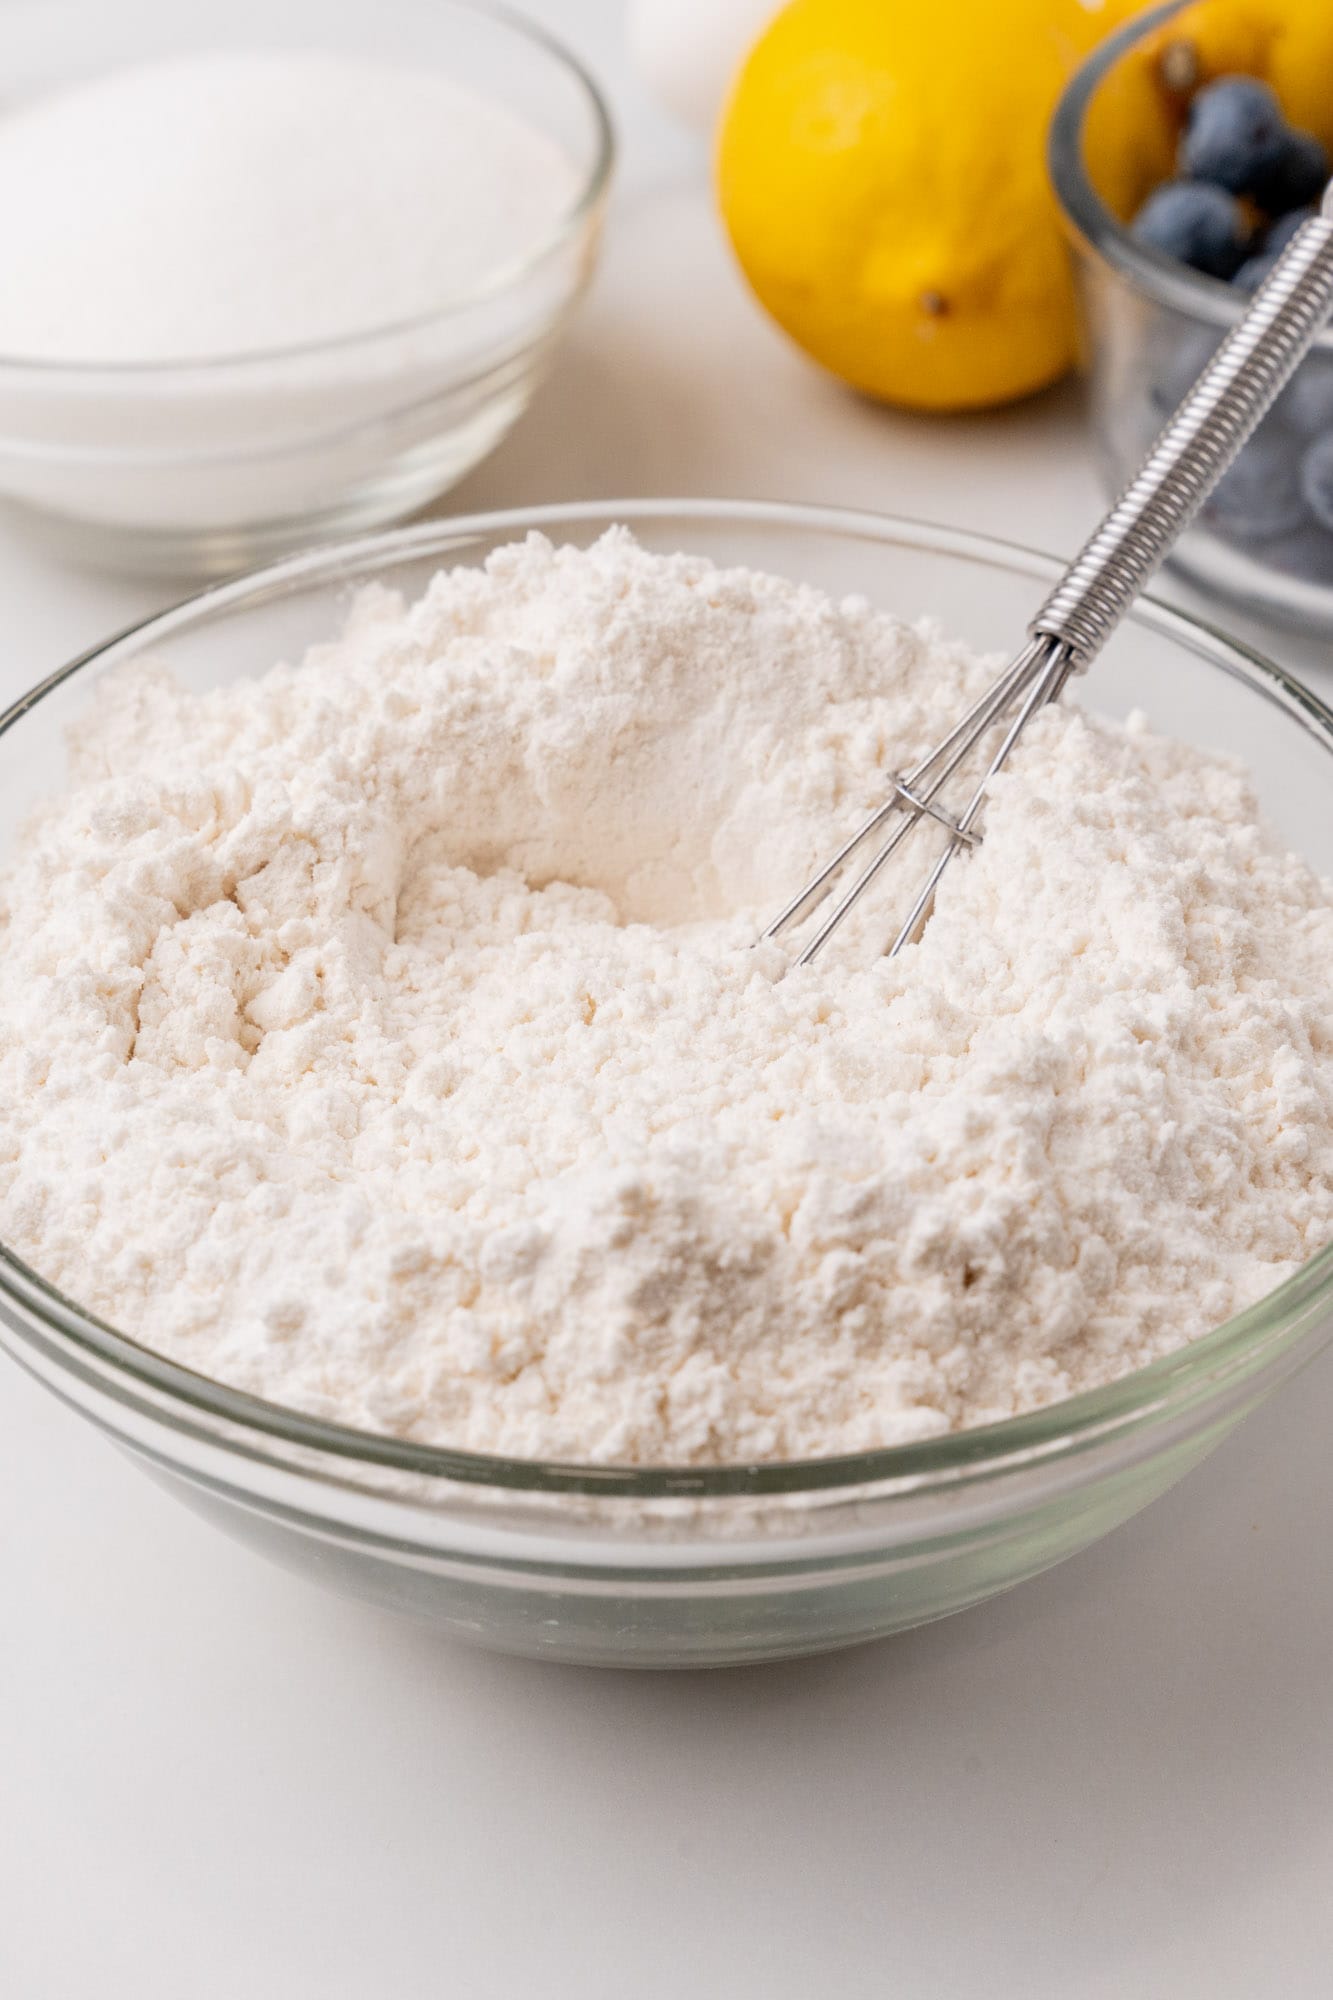 Flour and dry ingredients whisked in a glass bowl. In the background are lemons, sugar, and blueberries.